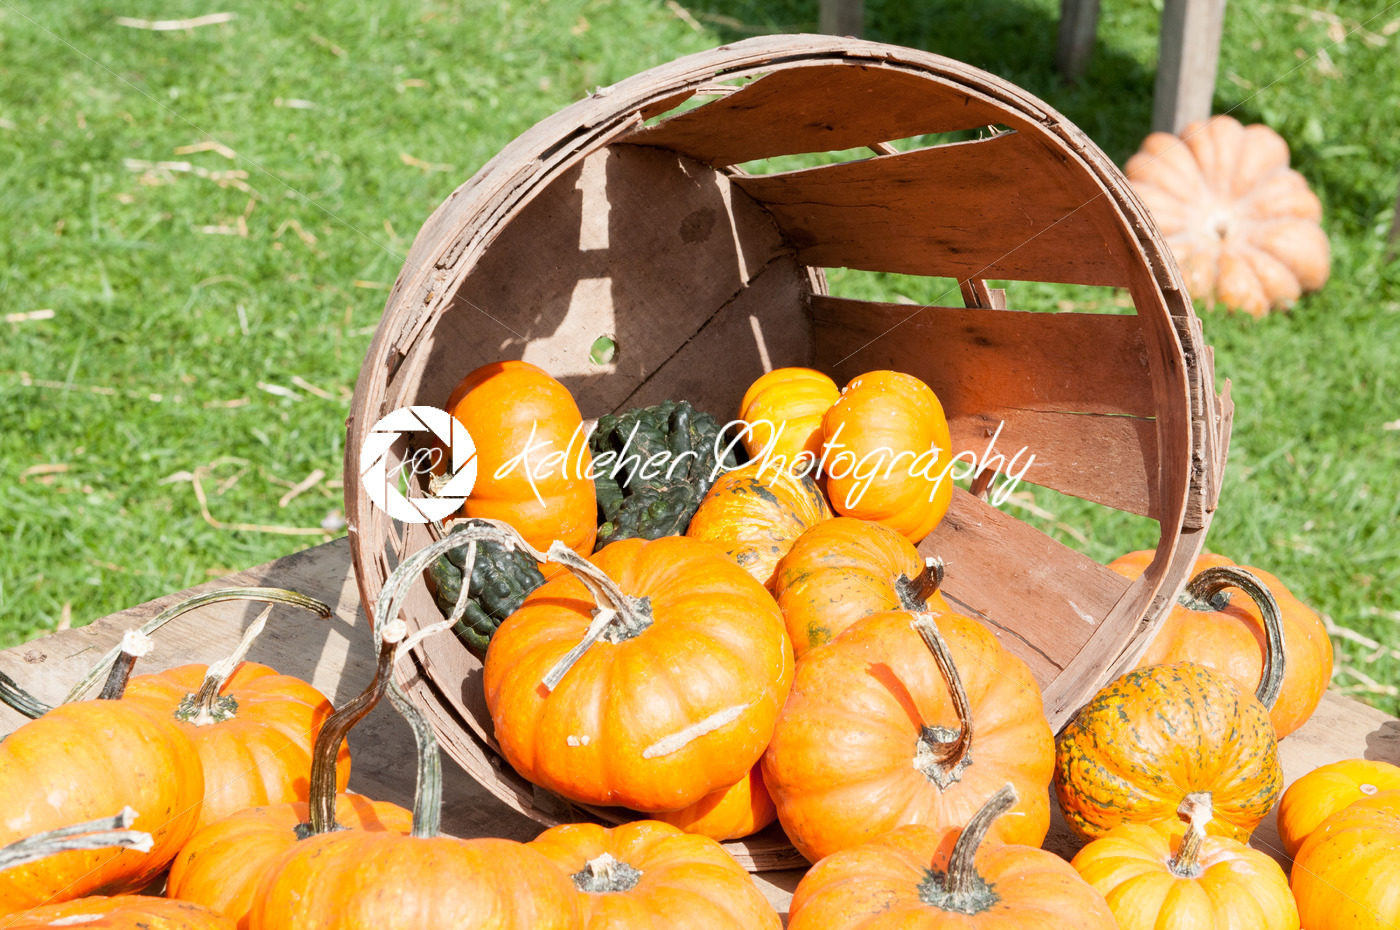 Various Pumpkins and other gourds in basket on table during fall - Kelleher Photography Store